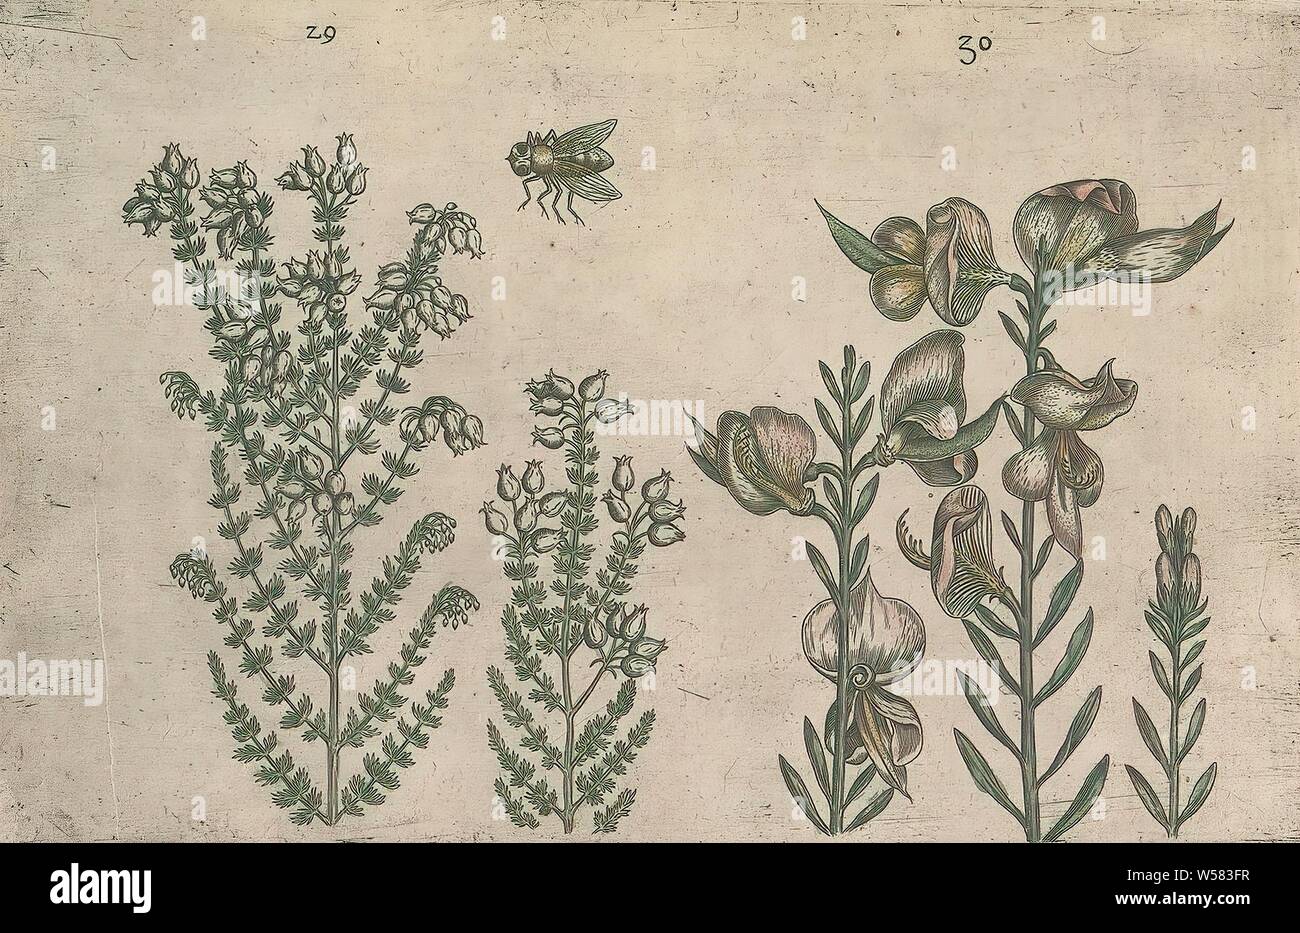 Heath (Erica tetralix) and broom bush (Spartium junceum), Heath and broom bush (or broom). With a bee. FIGs. 29 and 30 on a sheet numbered by hand 16. In: Anselmi Boetii de Boot I.C. Brugensis & Rodolphi II. Imp. Novel. medici a cubiculis Florum, Herbarum, ac fructuum selectiorum icones, & vires pleraeque hactenus ignotæ. Part of the album with sheets and plates from De Boodts herbarium from 1640. The twelfth of twelve albums with watercolors of animals, birds and plants known around 1600, commissioned by Emperor Rudolf II, anonymous, 1604 - 1632 and/or 1640, paper, ink, watercolor (paint Stock Photo